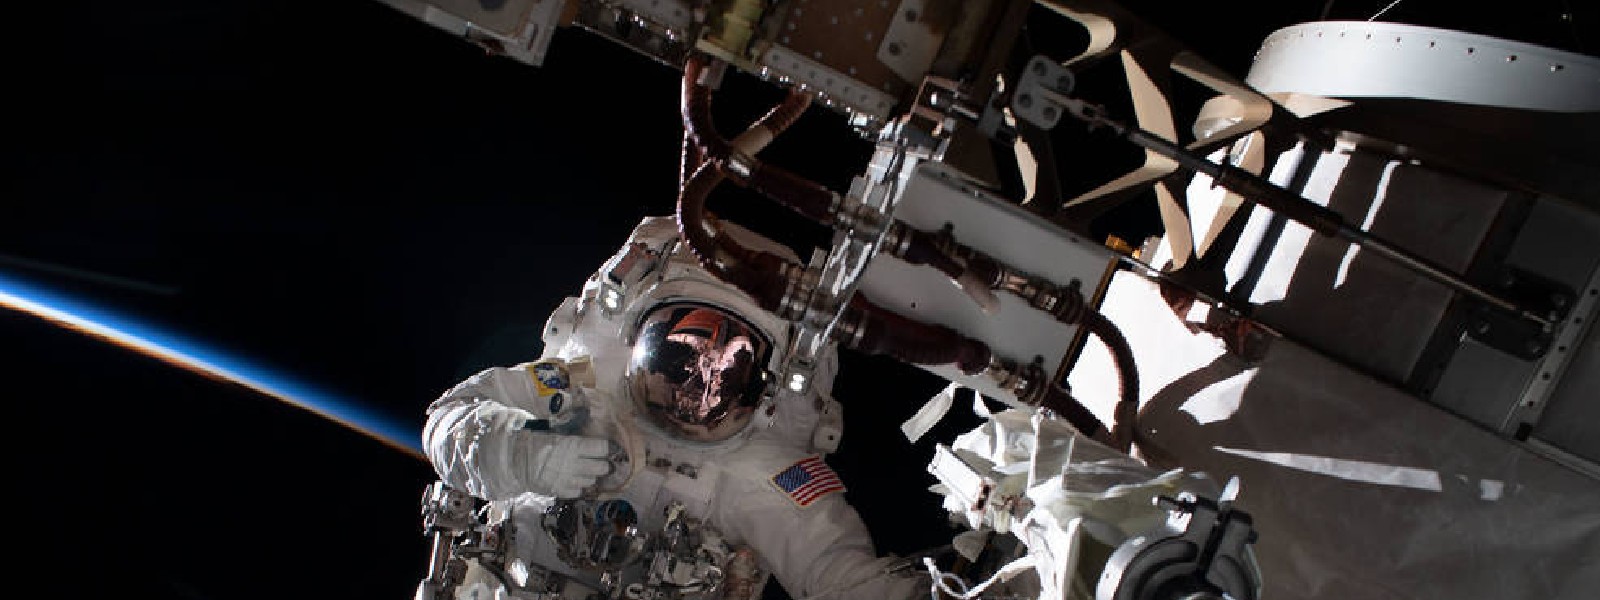 ISS Astronauts to conduct spacewalk